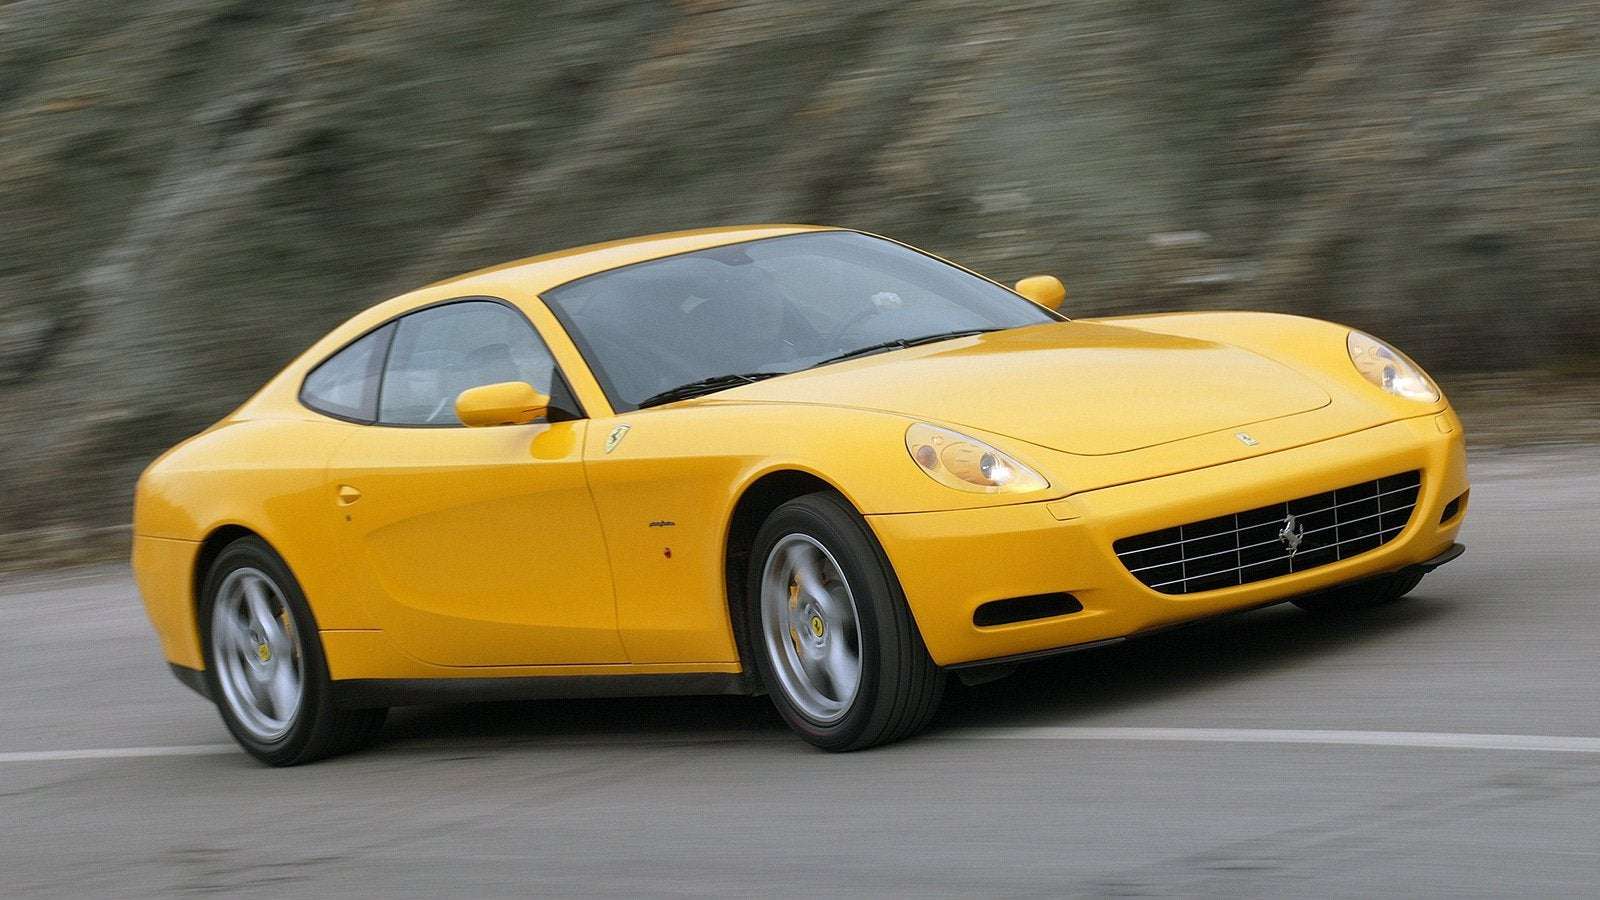 image for Ferrari Is Recalling Nearly Every Car It's Sold Since 2005